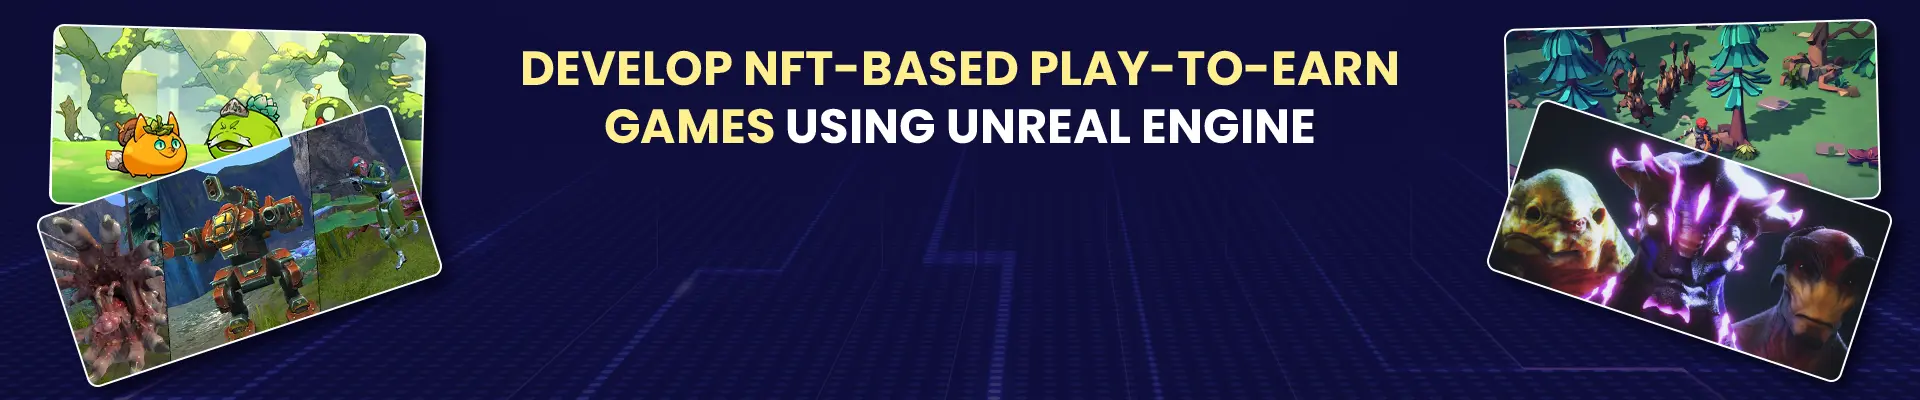 Build NFT-Based Play-to-Earn Games Using Unreal Engine